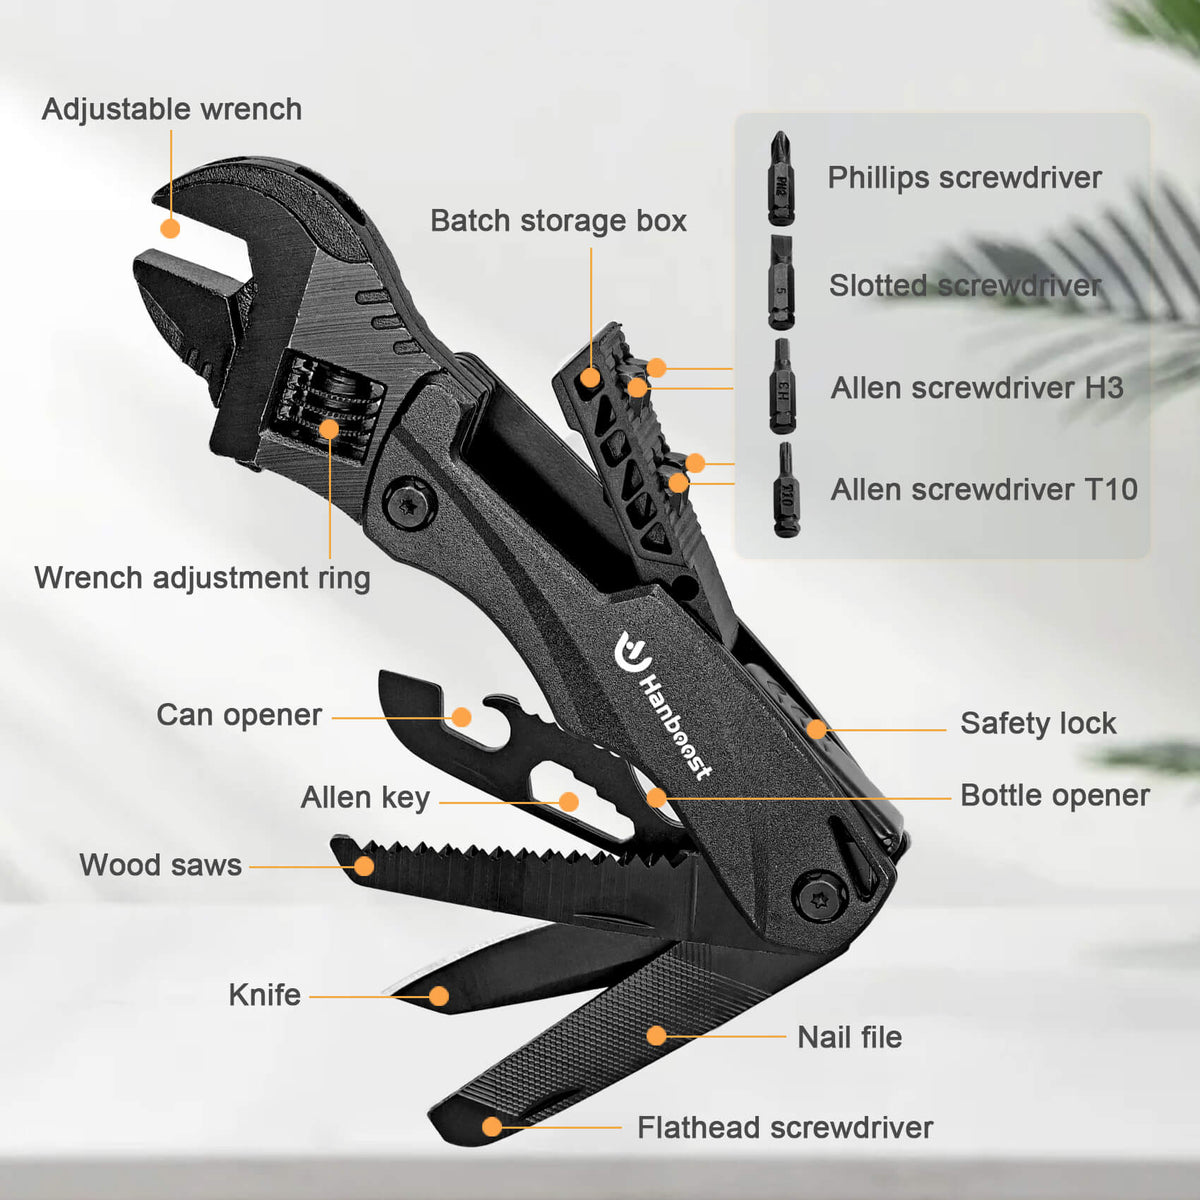 Hanboost Multitool Adjustable Wrench 12 In 1 Gadget for Camping (Black)